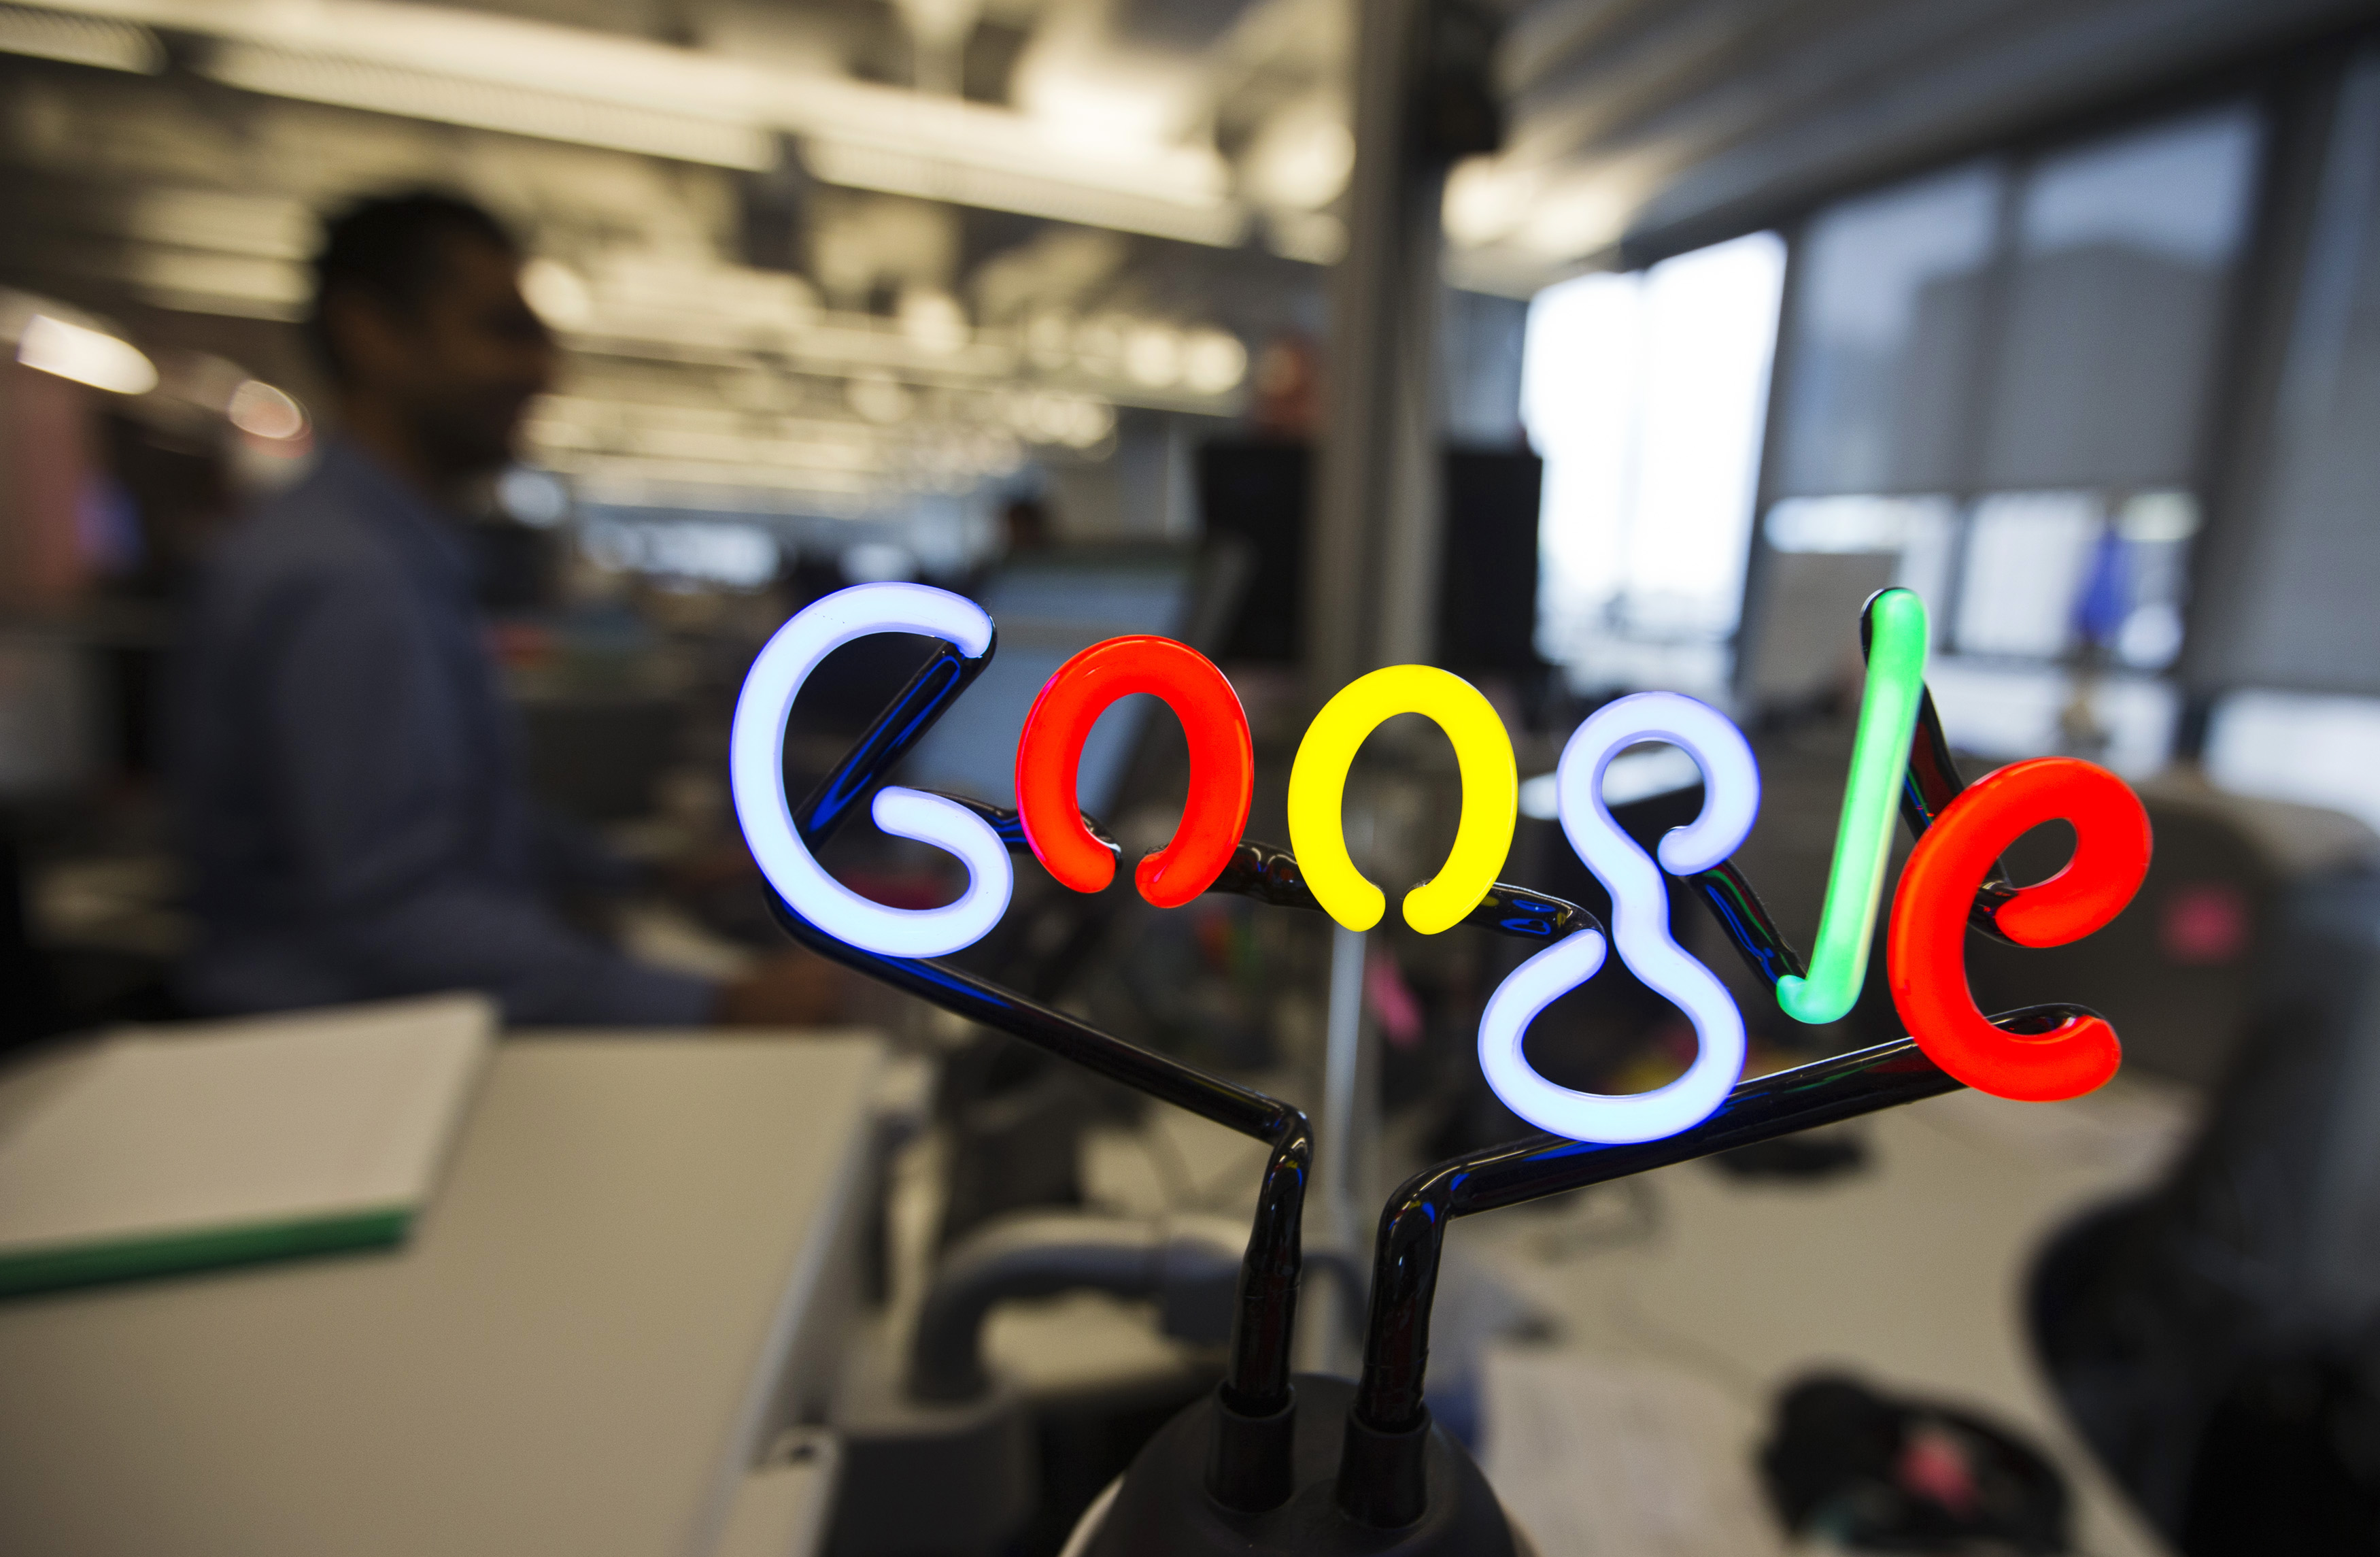 Google employees takes step to tweak company's search related functions